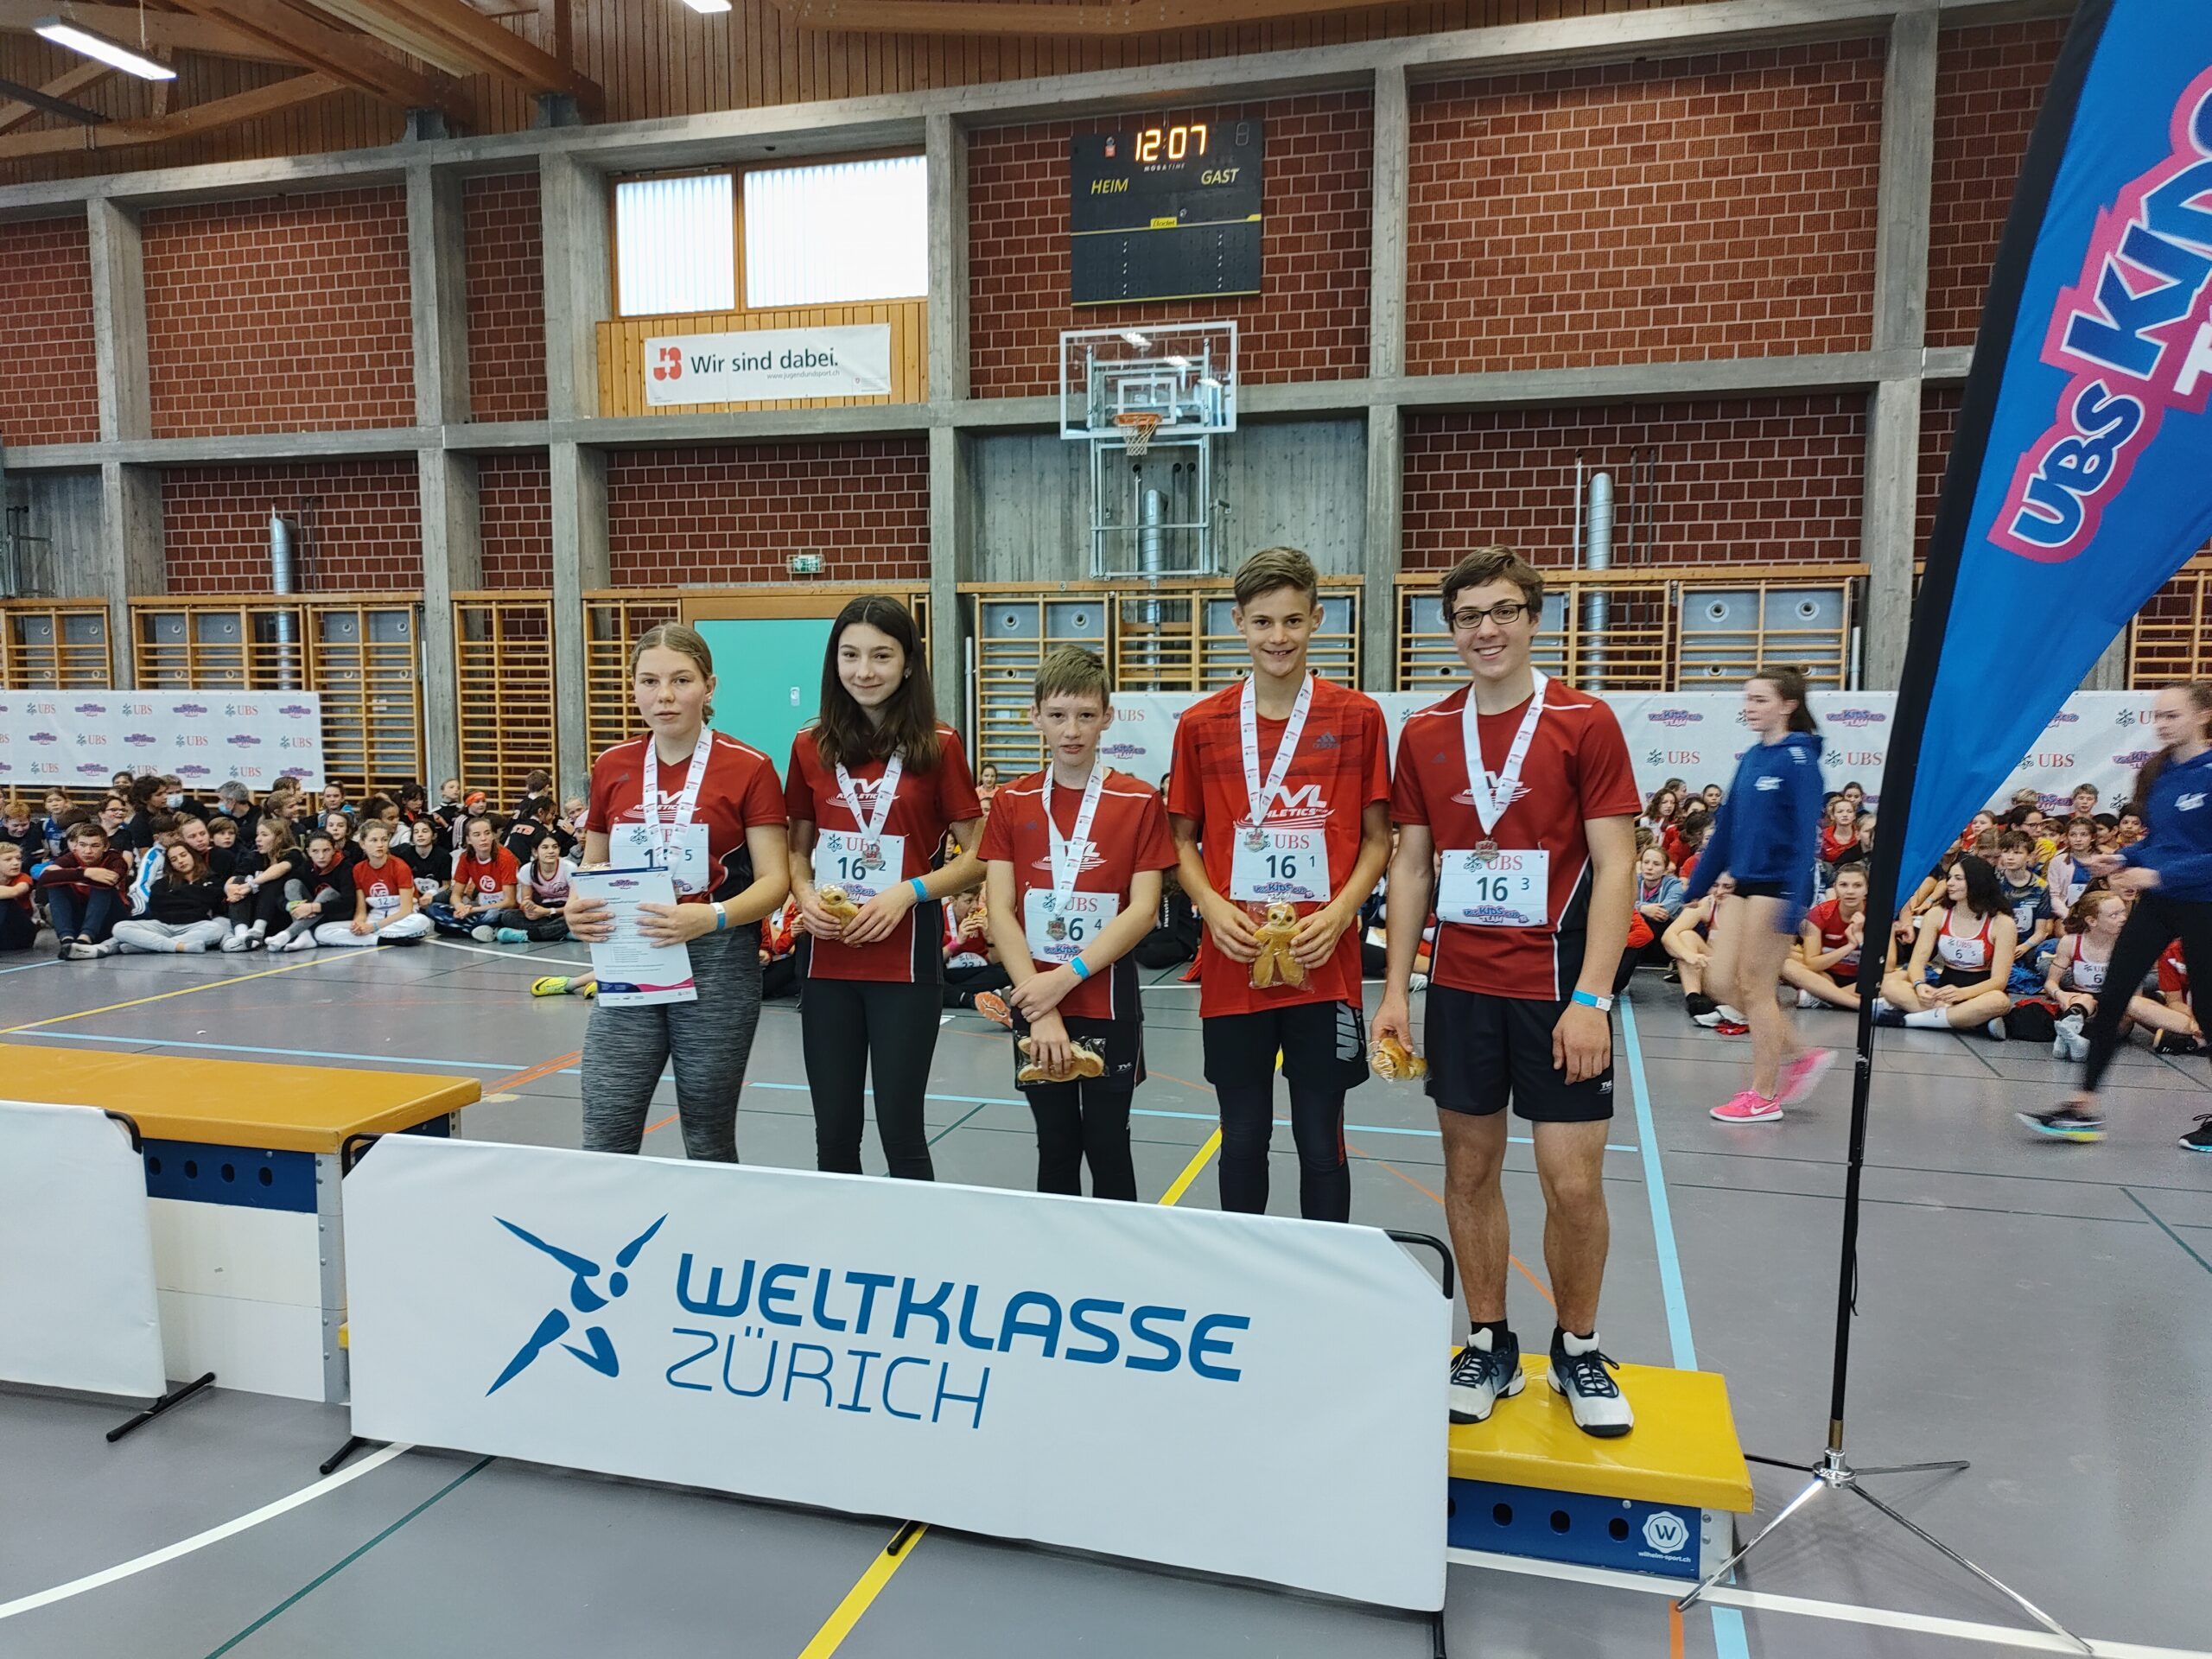 You are currently viewing Bericht UBS Kids Cup Teams, Herzogenbuchsee